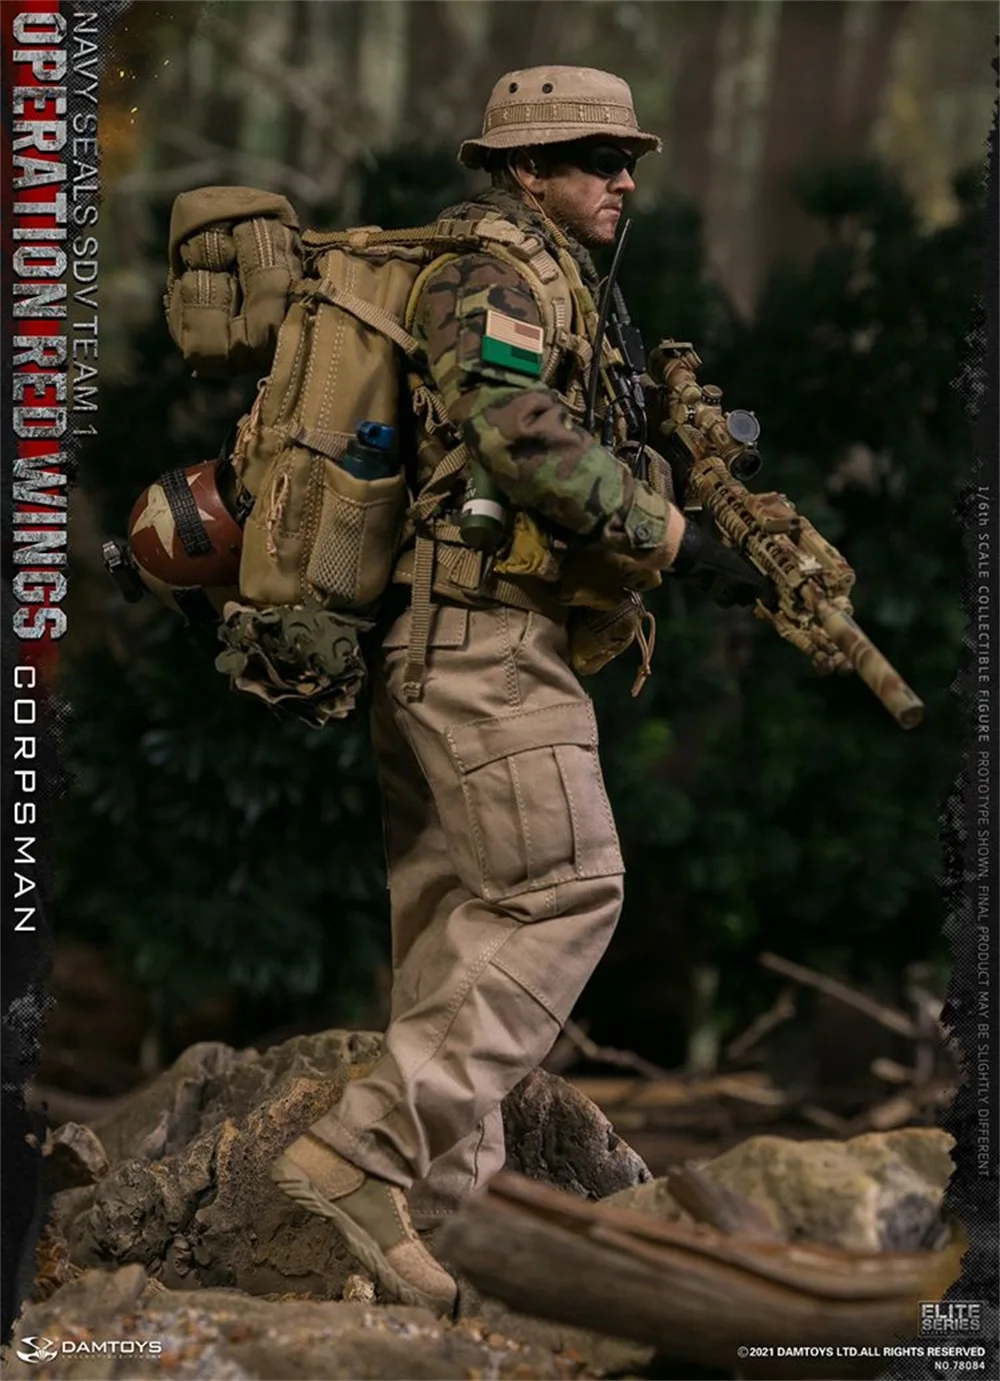 

1/6 DAMTOYS DAM 78084 Navy Seals SDV Team 1 Operation Red Wings Corpsman Khaki Military Pant Hat For 12inch Male Action Figures